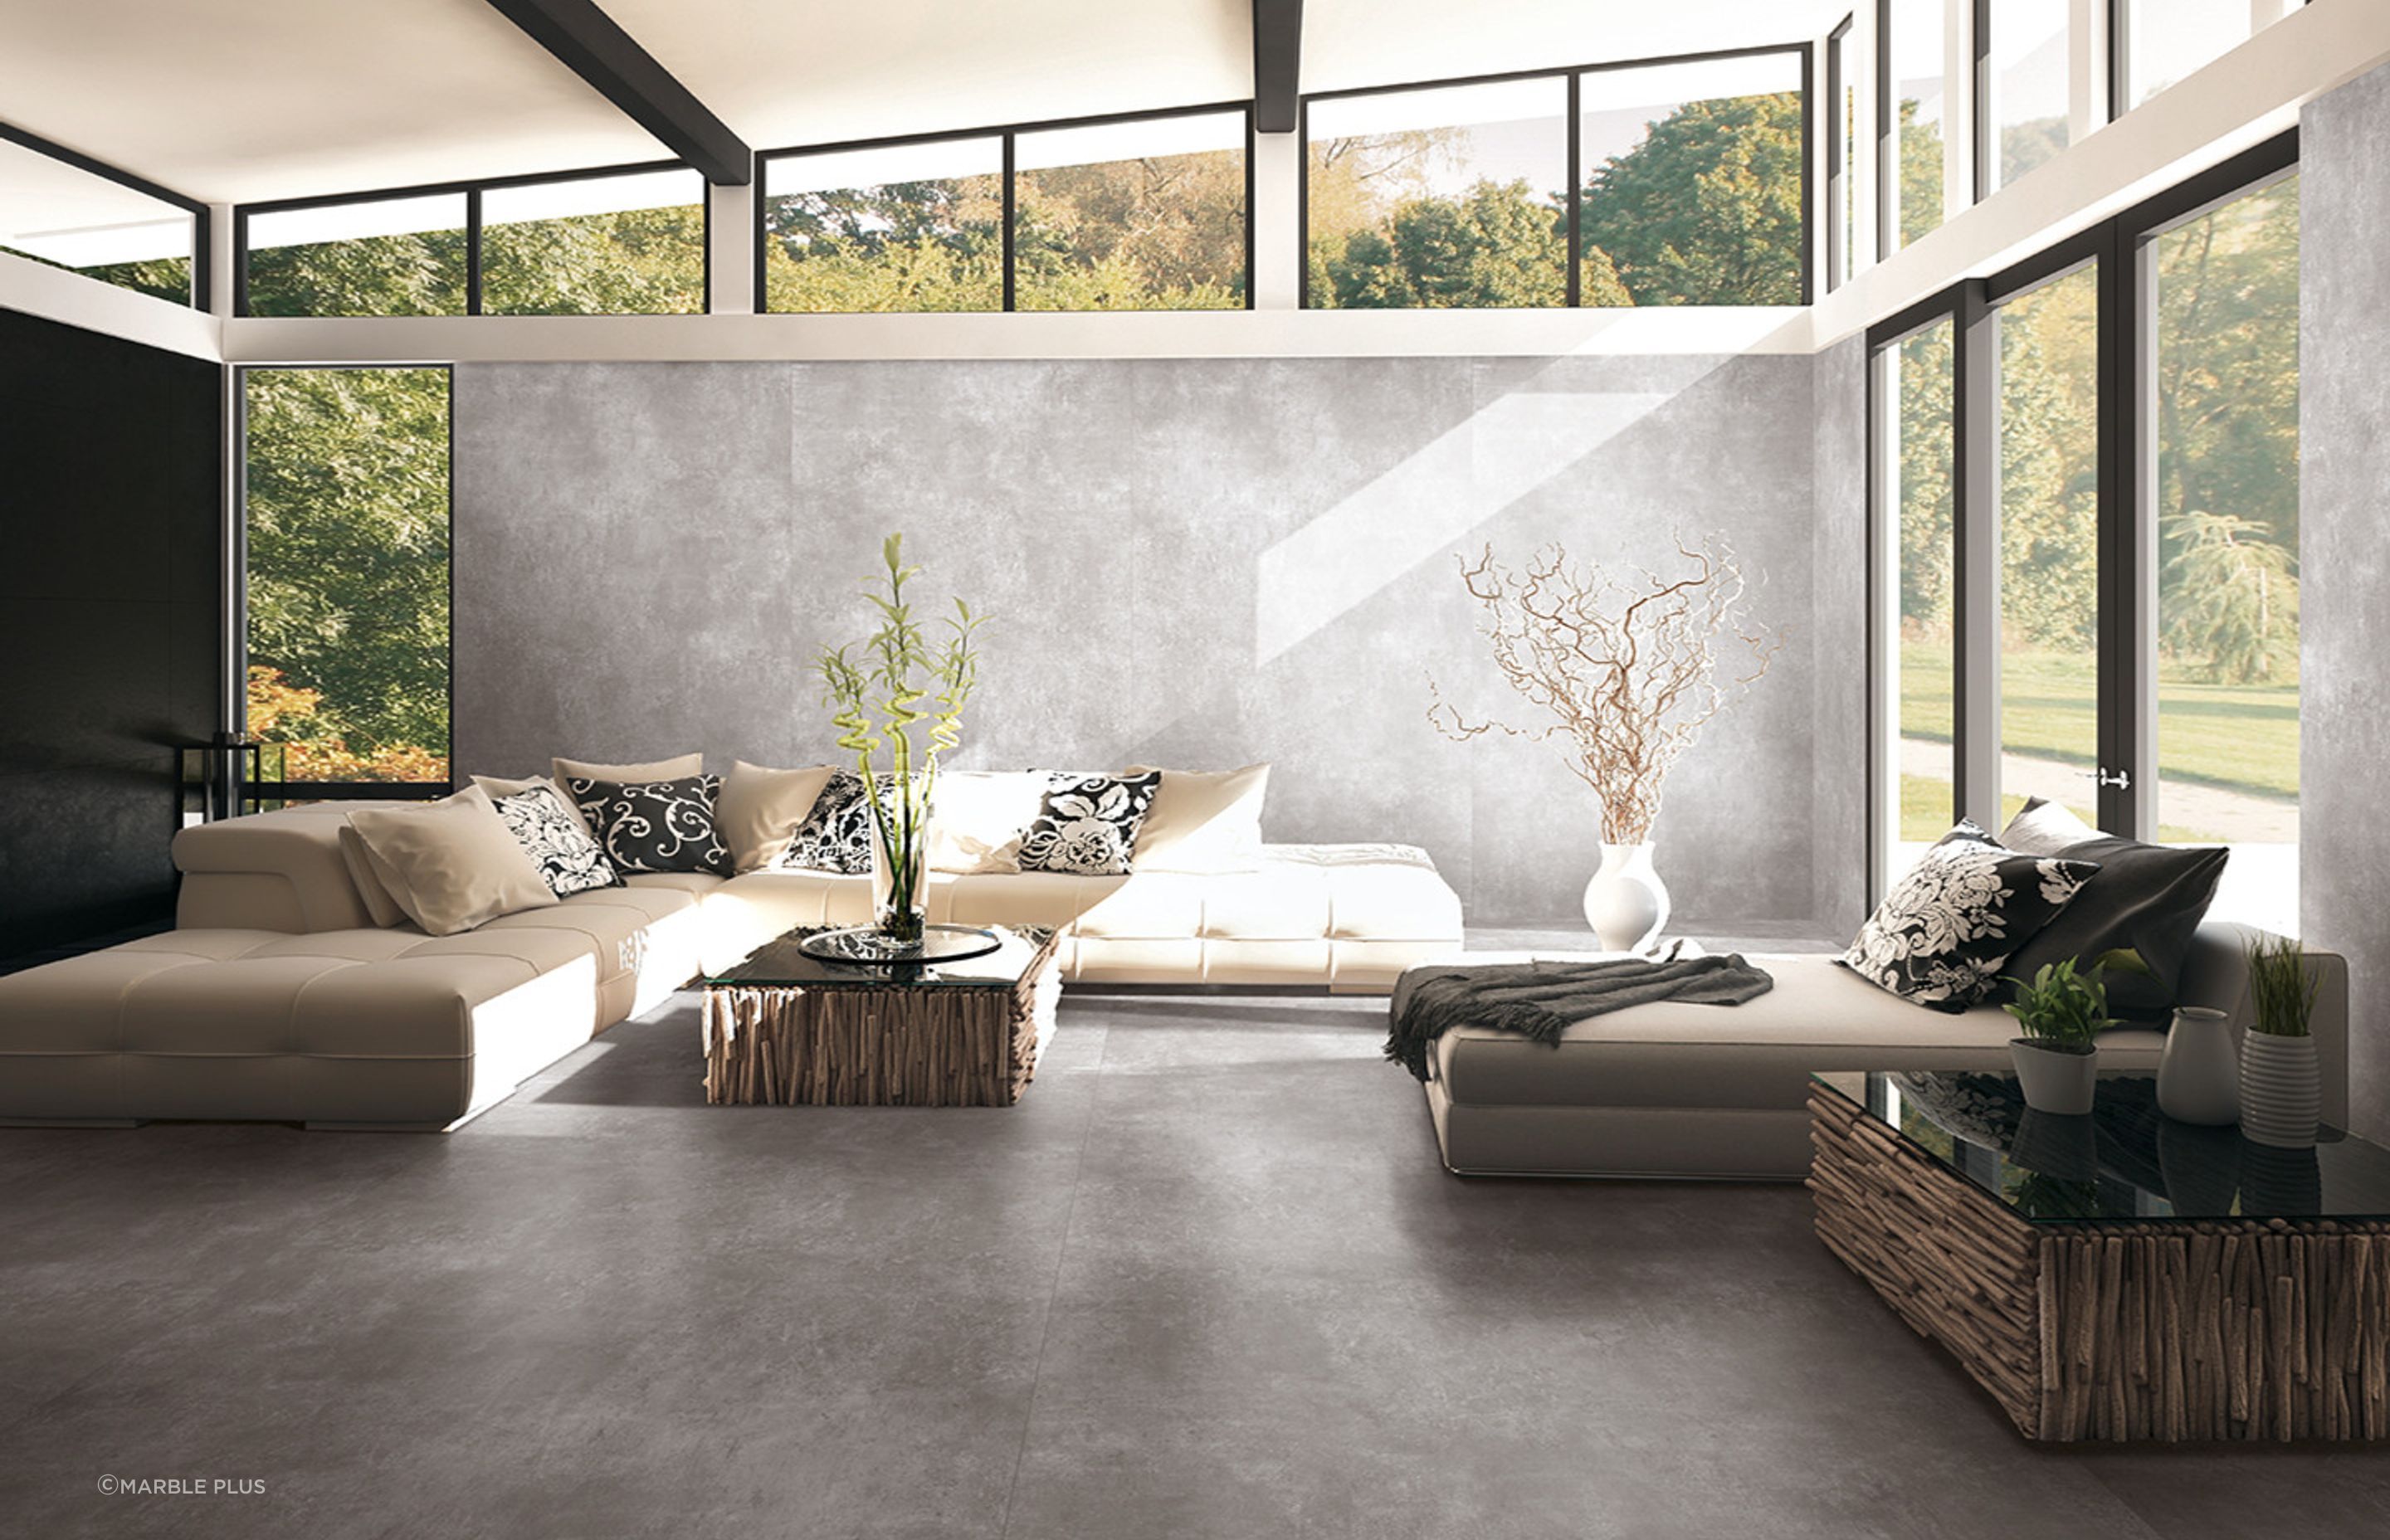 These stunning decorative wall panels offer a unique cladding solution that have a dramatic effect on a space. Featured product: Loft Ash Grey Porcelain Slab